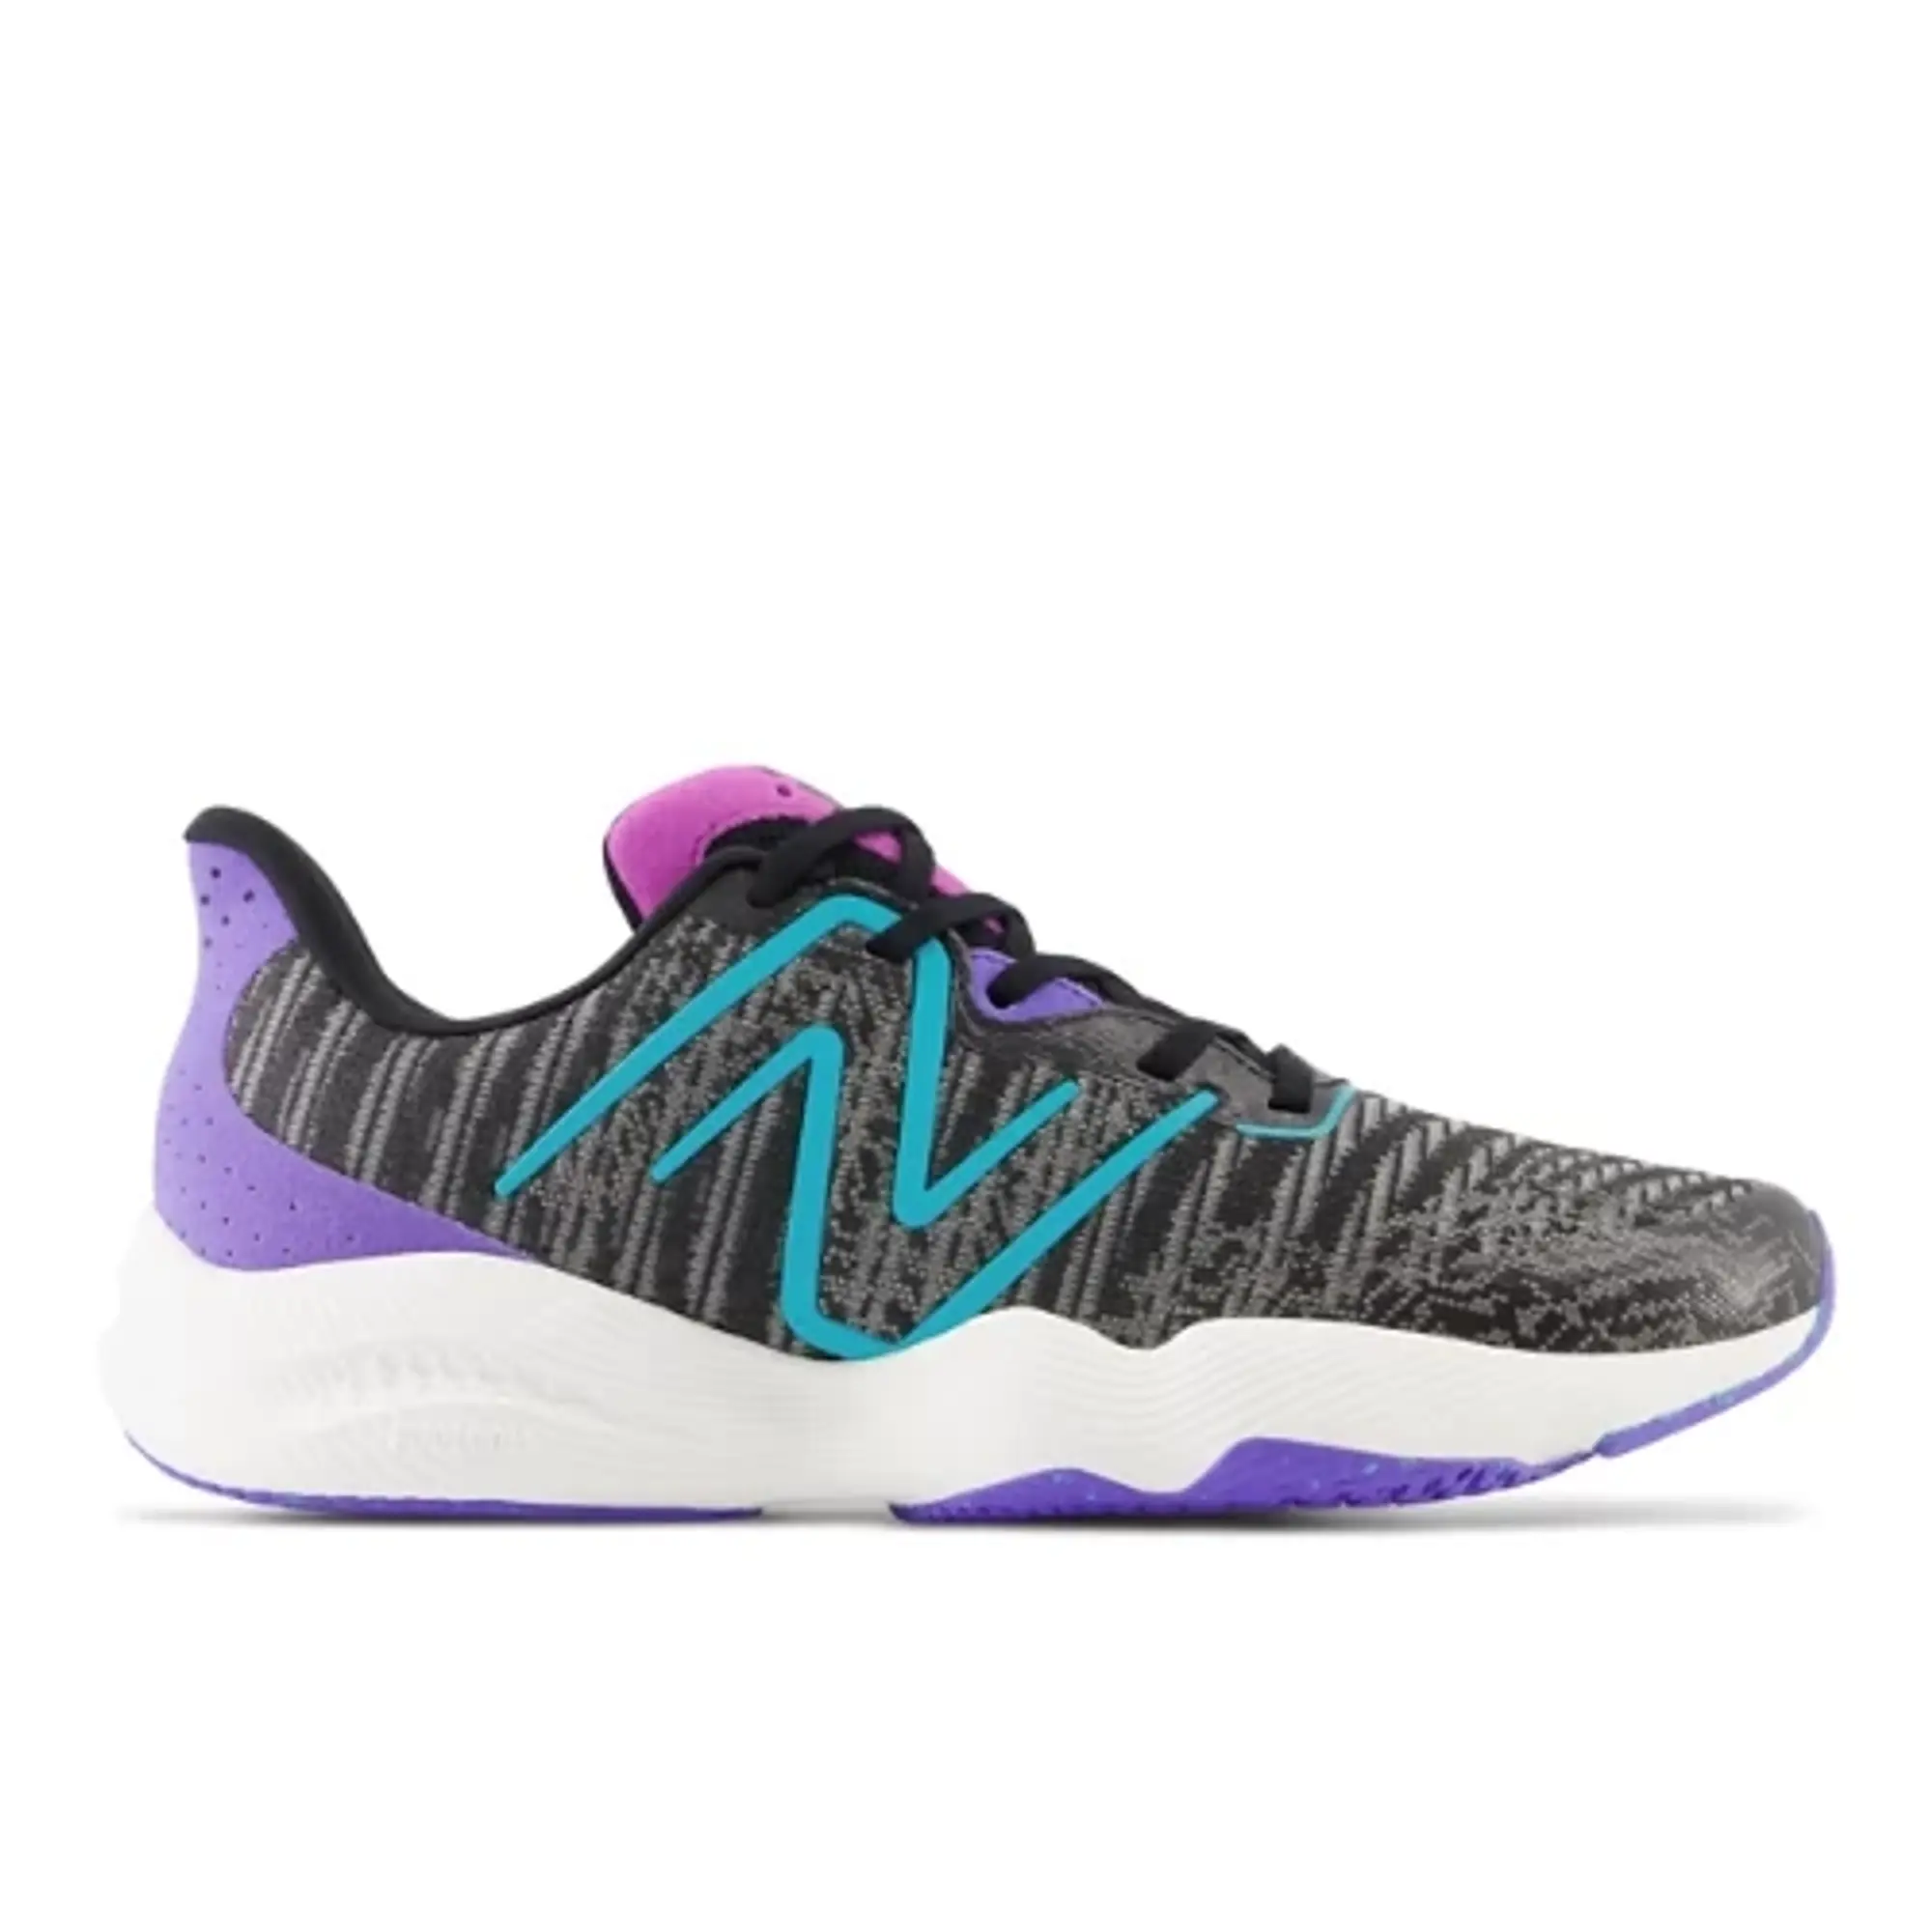 New Balance Women's FuelCell Shift TR v2 Textile